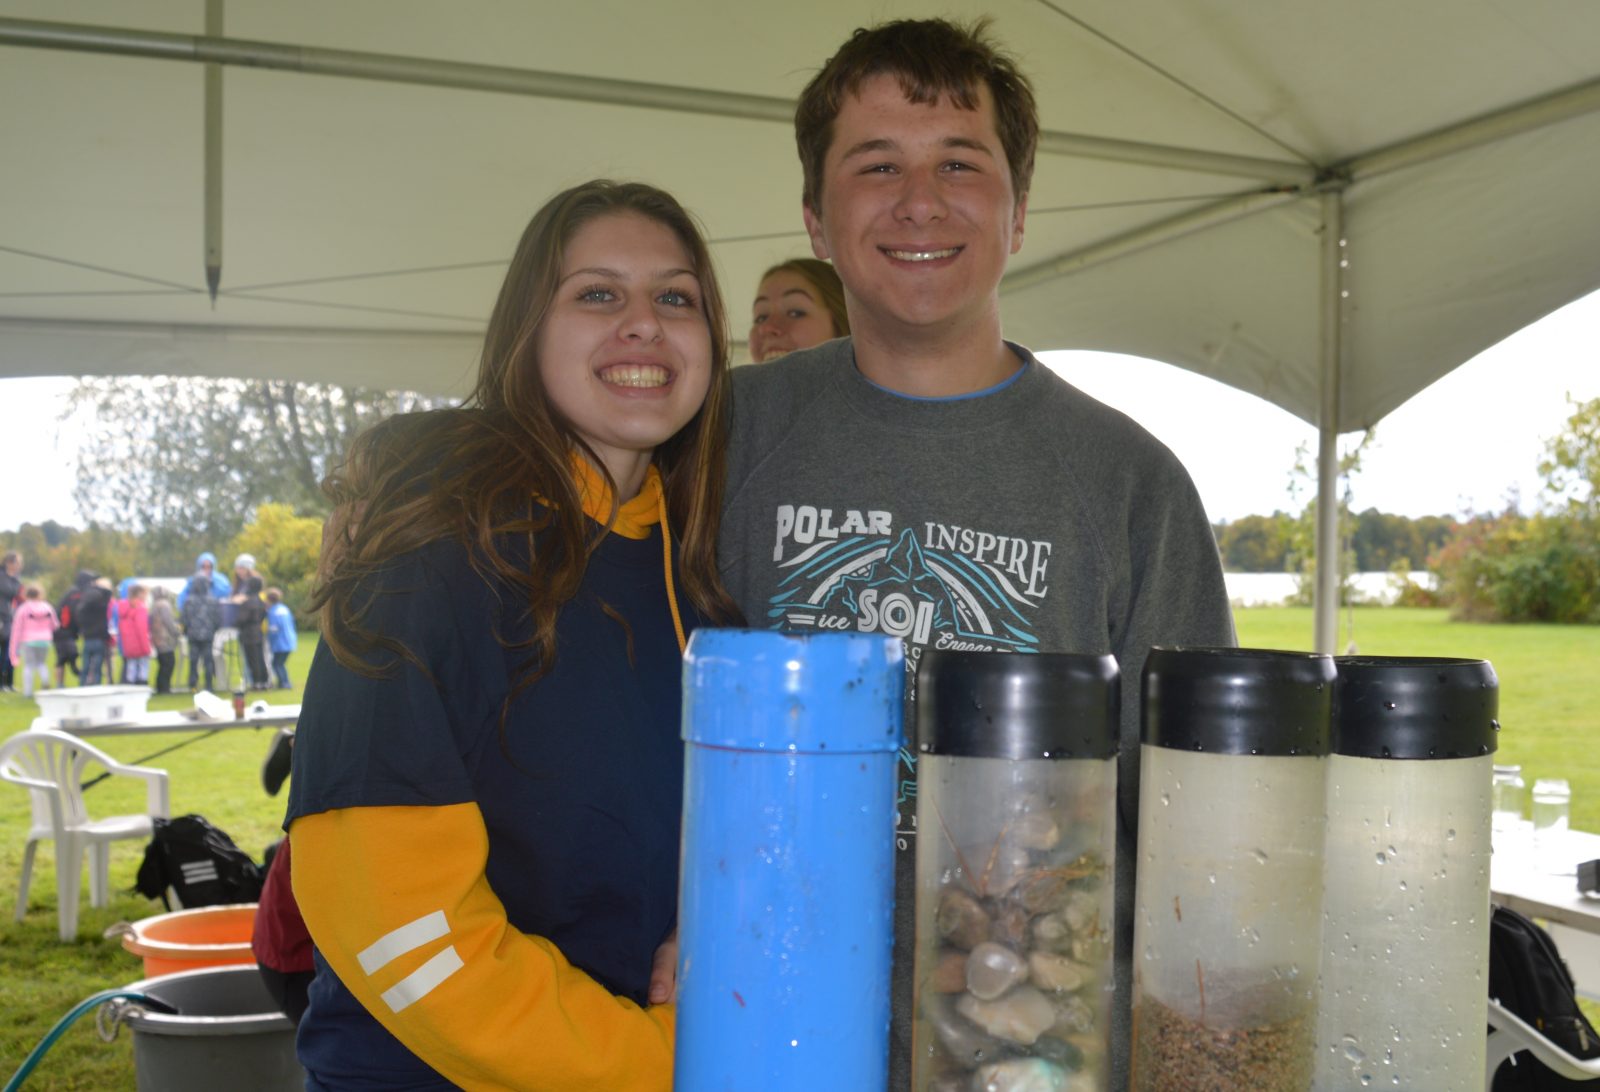 River Institute hosts hundreds at Water Festival